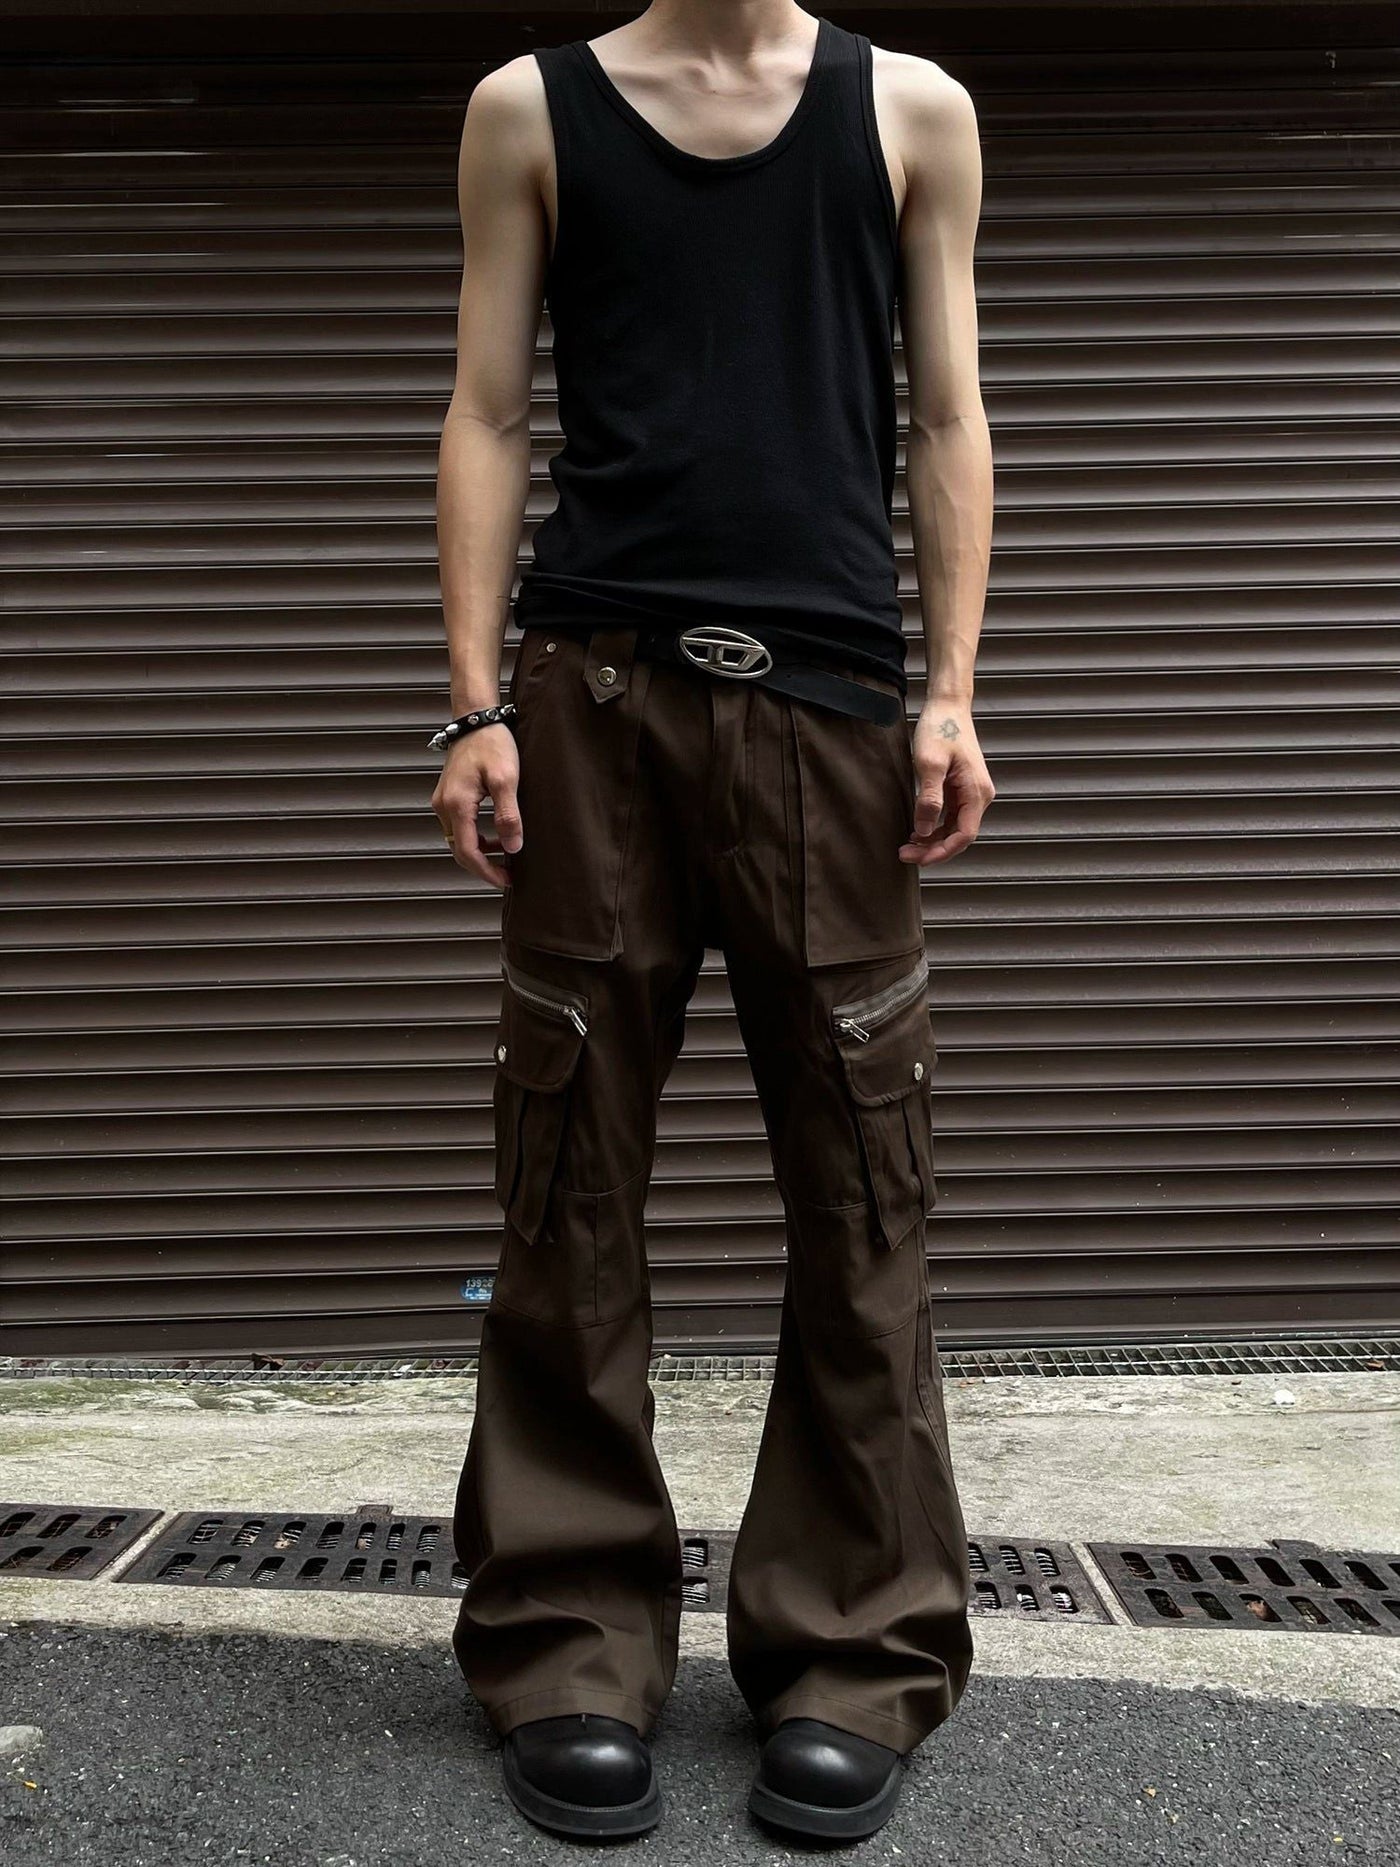 Straight Leg Flared Cargo Pants Korean Street Fashion Pants By MaxDstr Shop Online at OH Vault